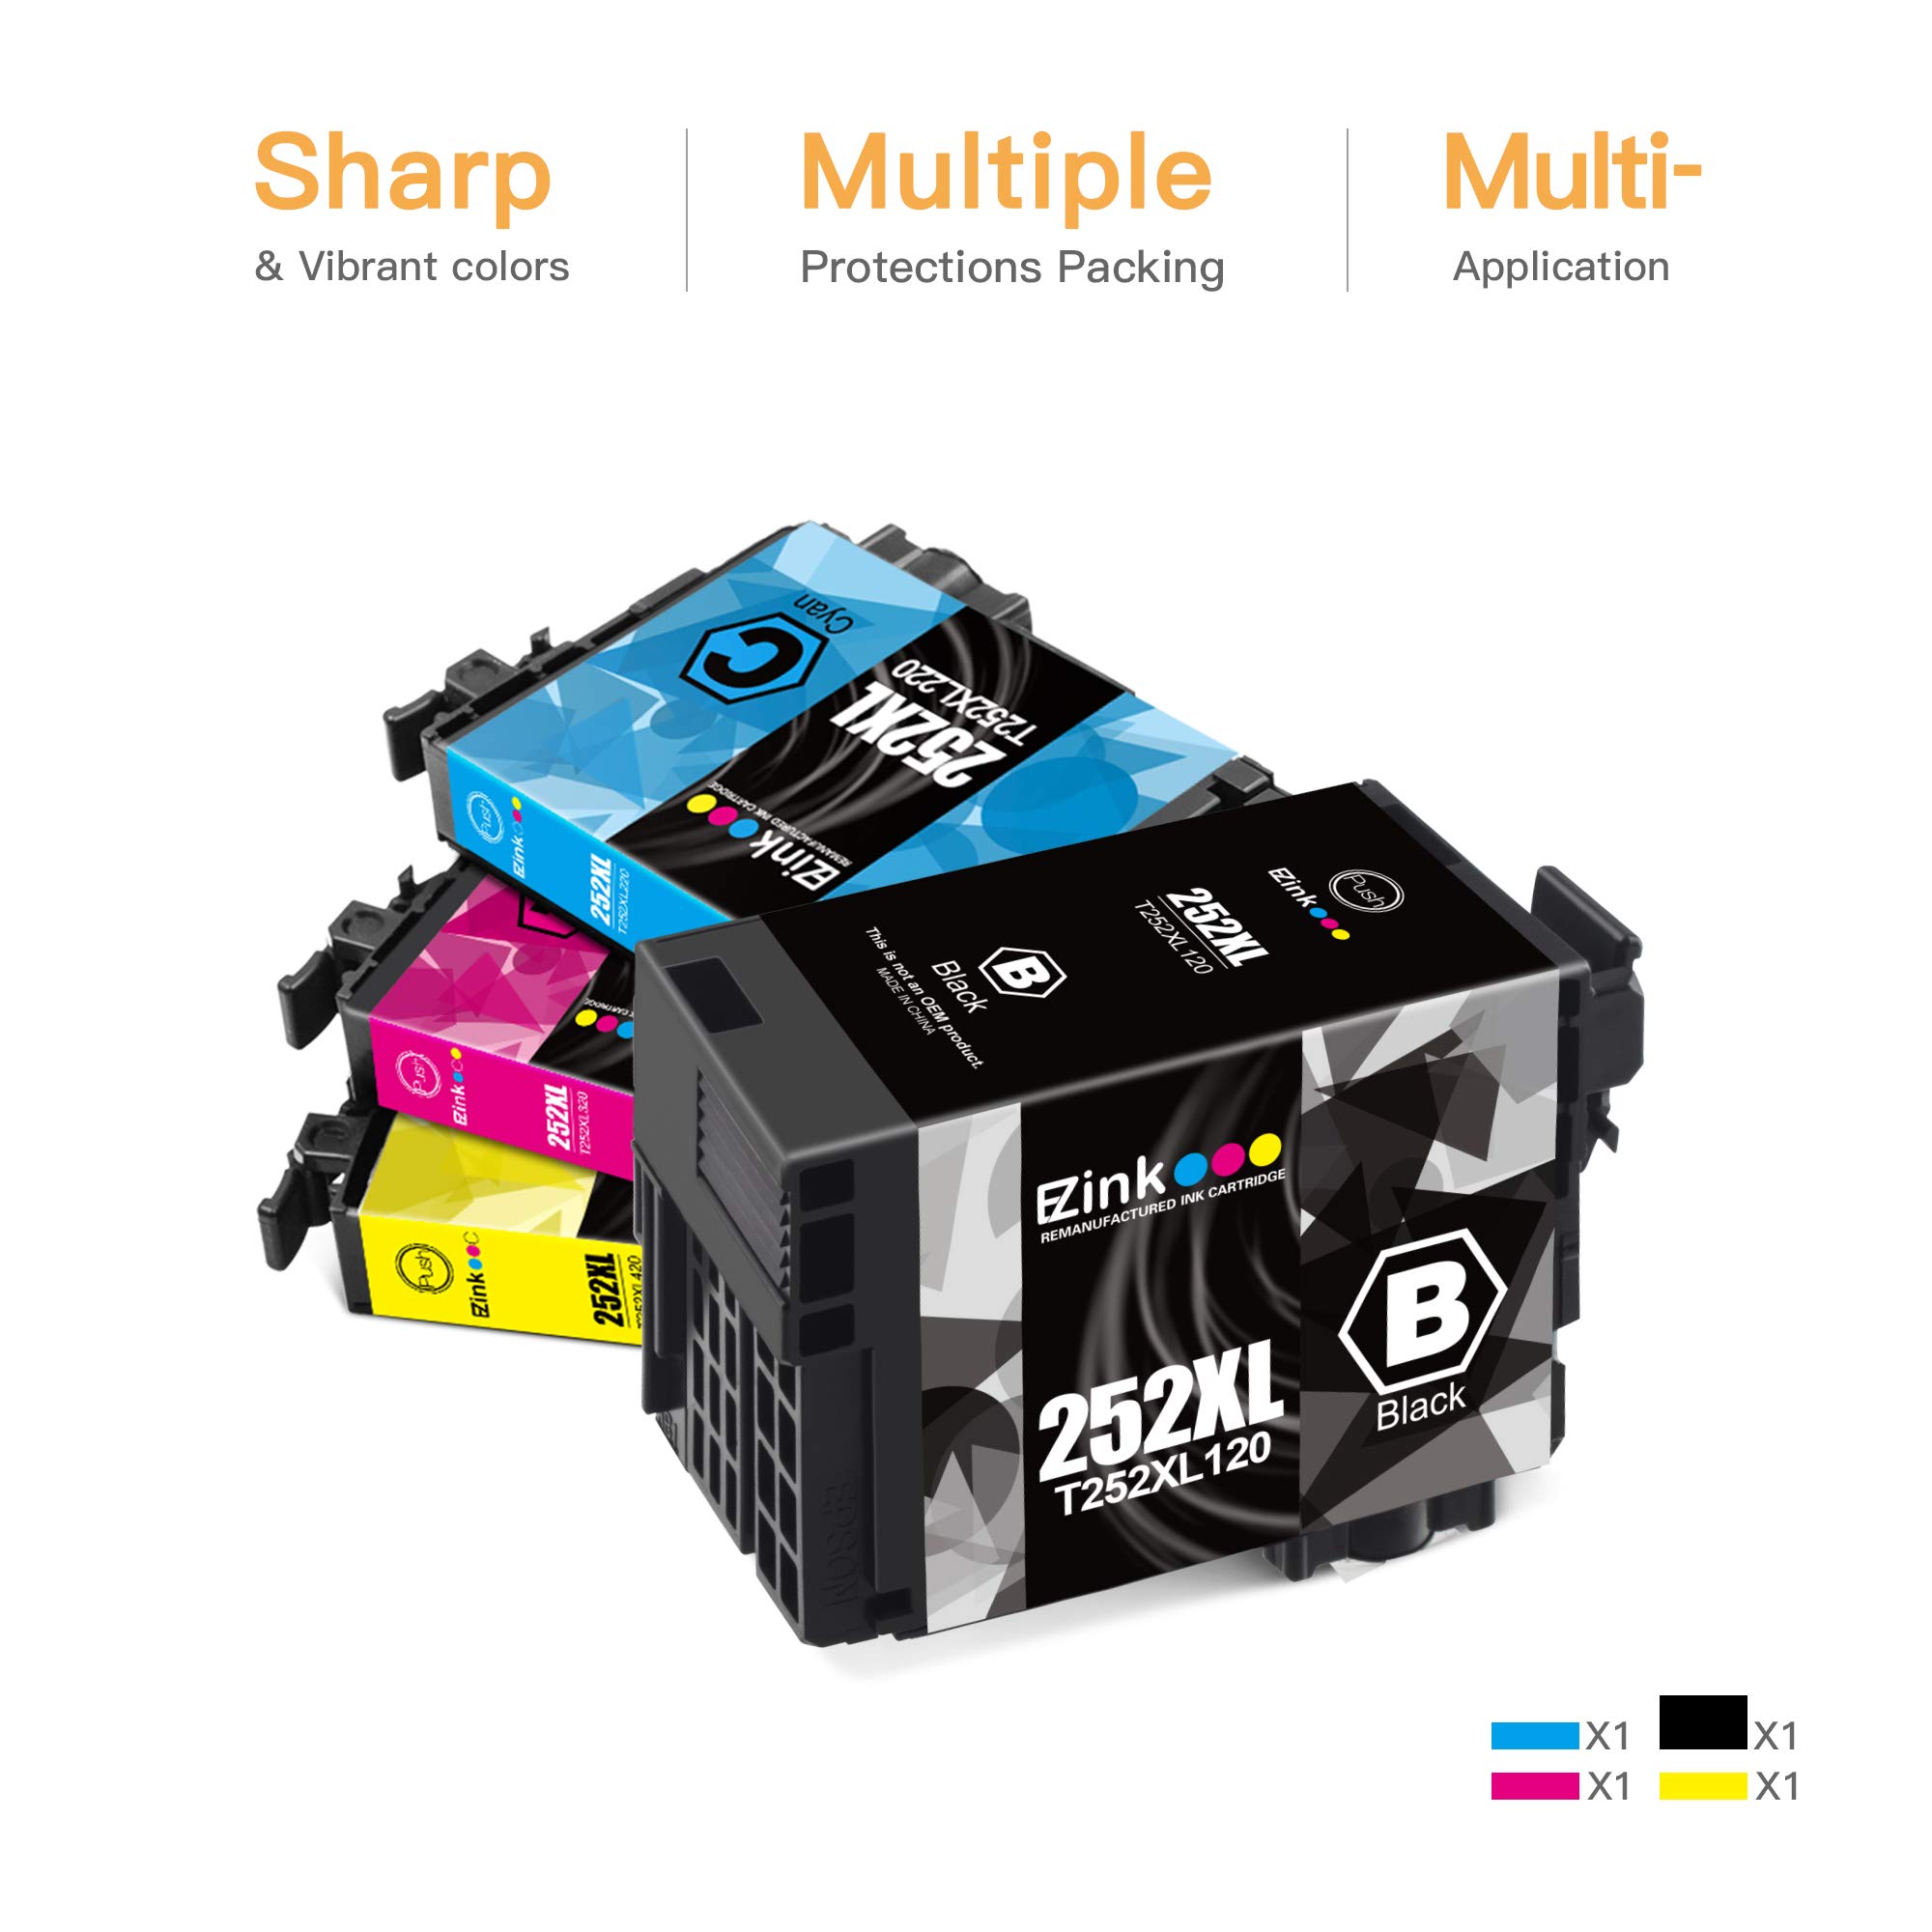 E-Z Ink (TM Remanufactured Ink Cartridge Replacement for Epson 252XL 252 XL T252XL120 to use with Workforce WF-7110 WF-7720 WF-7710 WF-3620 WF-3640 (1 Large Black, 1 Cyan, 1 Magenta, 1 Yellow) 4 Pack